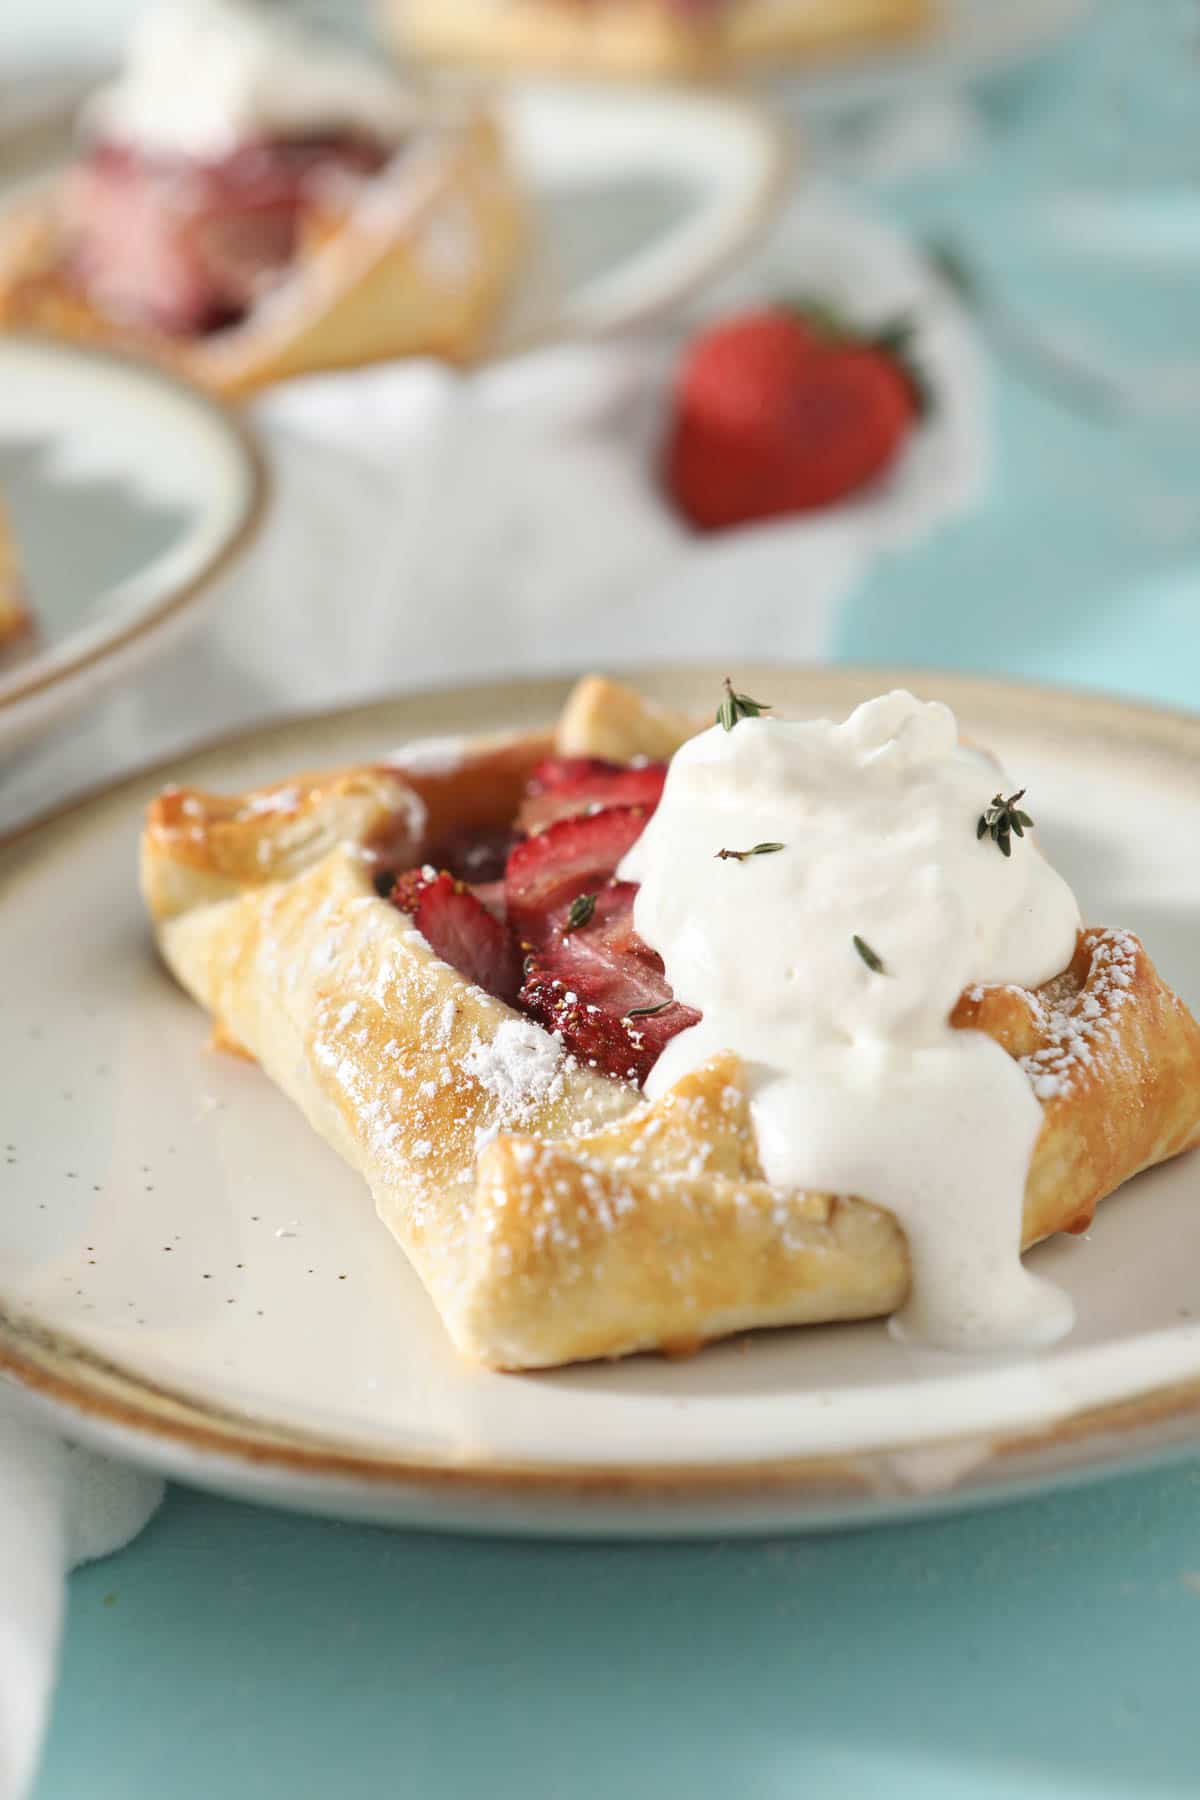 strawberry galette with whipped cream on top